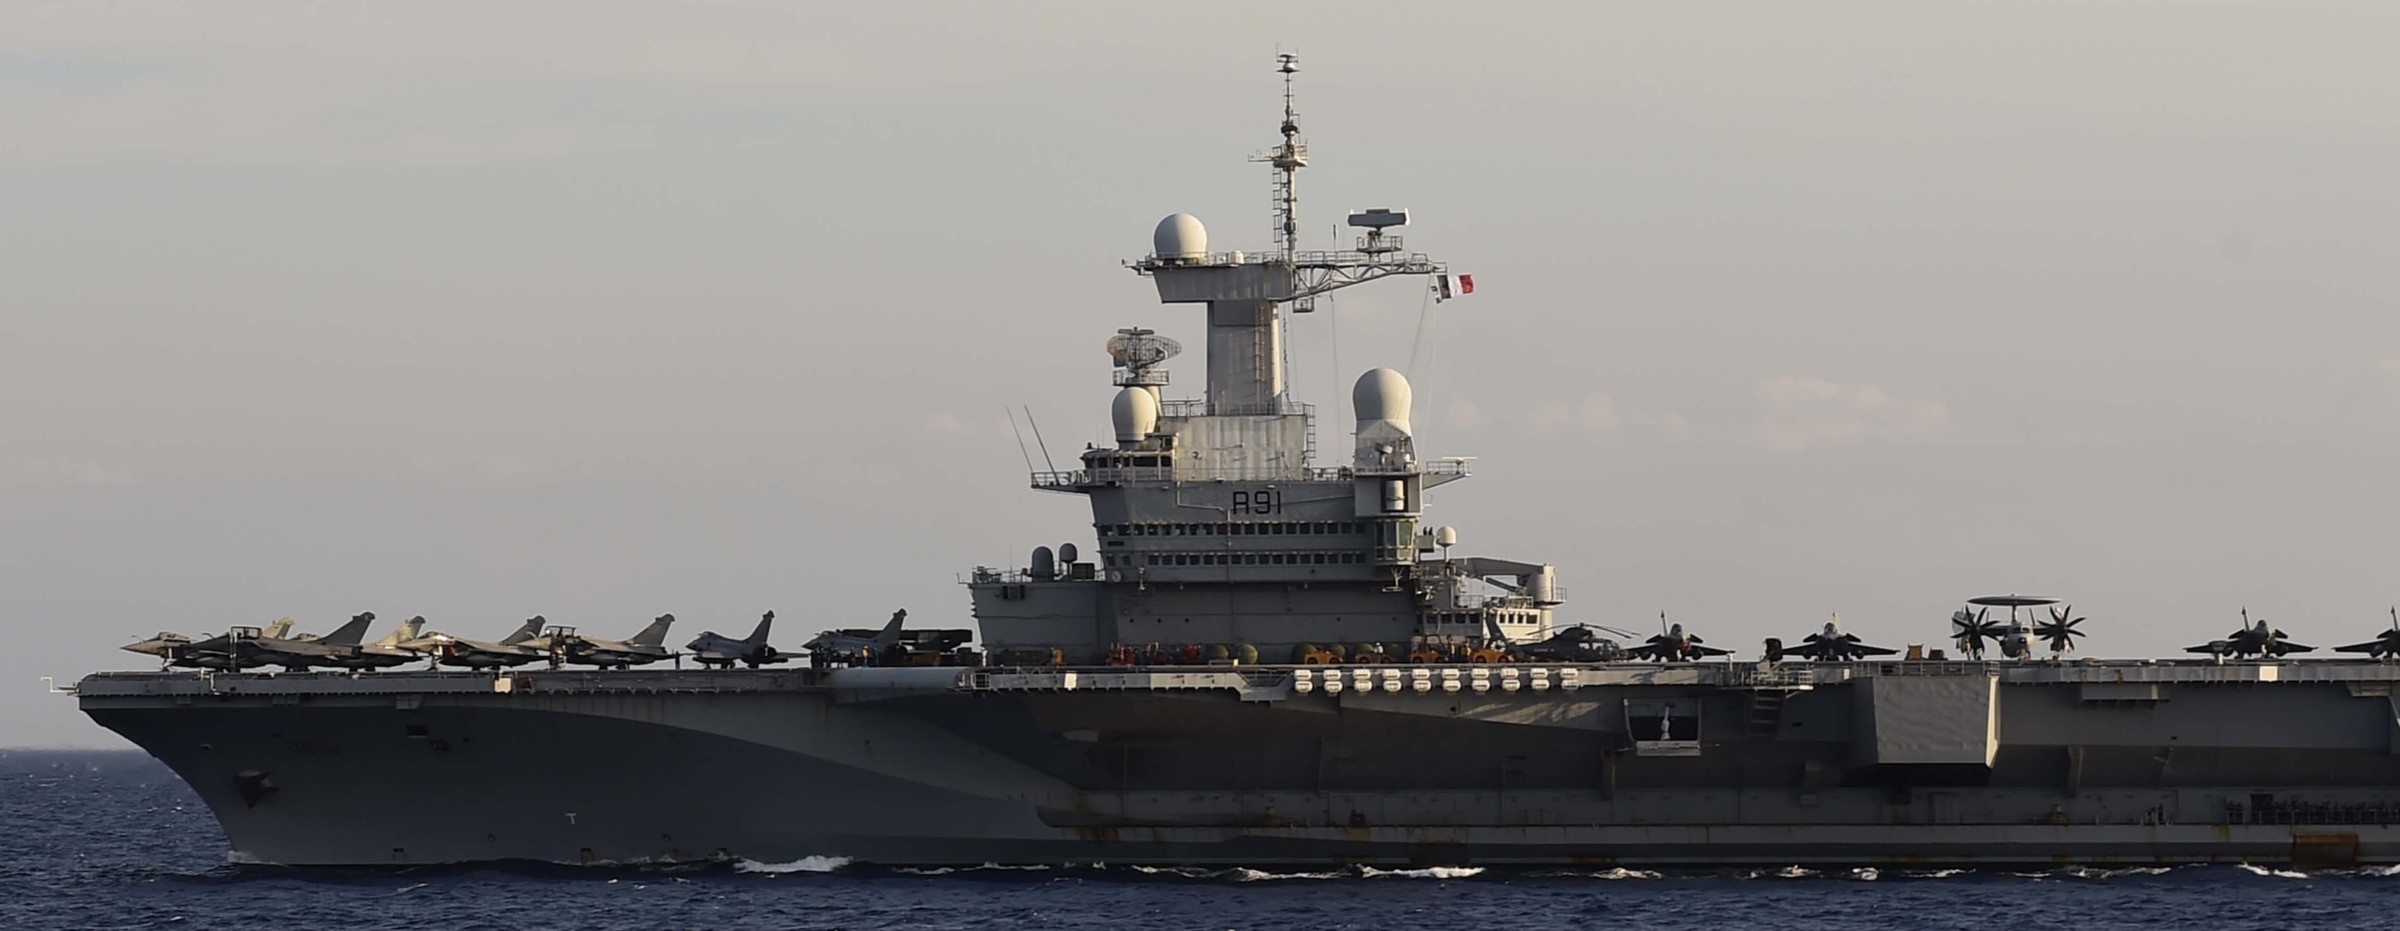  r-91 fs charles de gaulle aircraft carrier french navy 46 porte avions